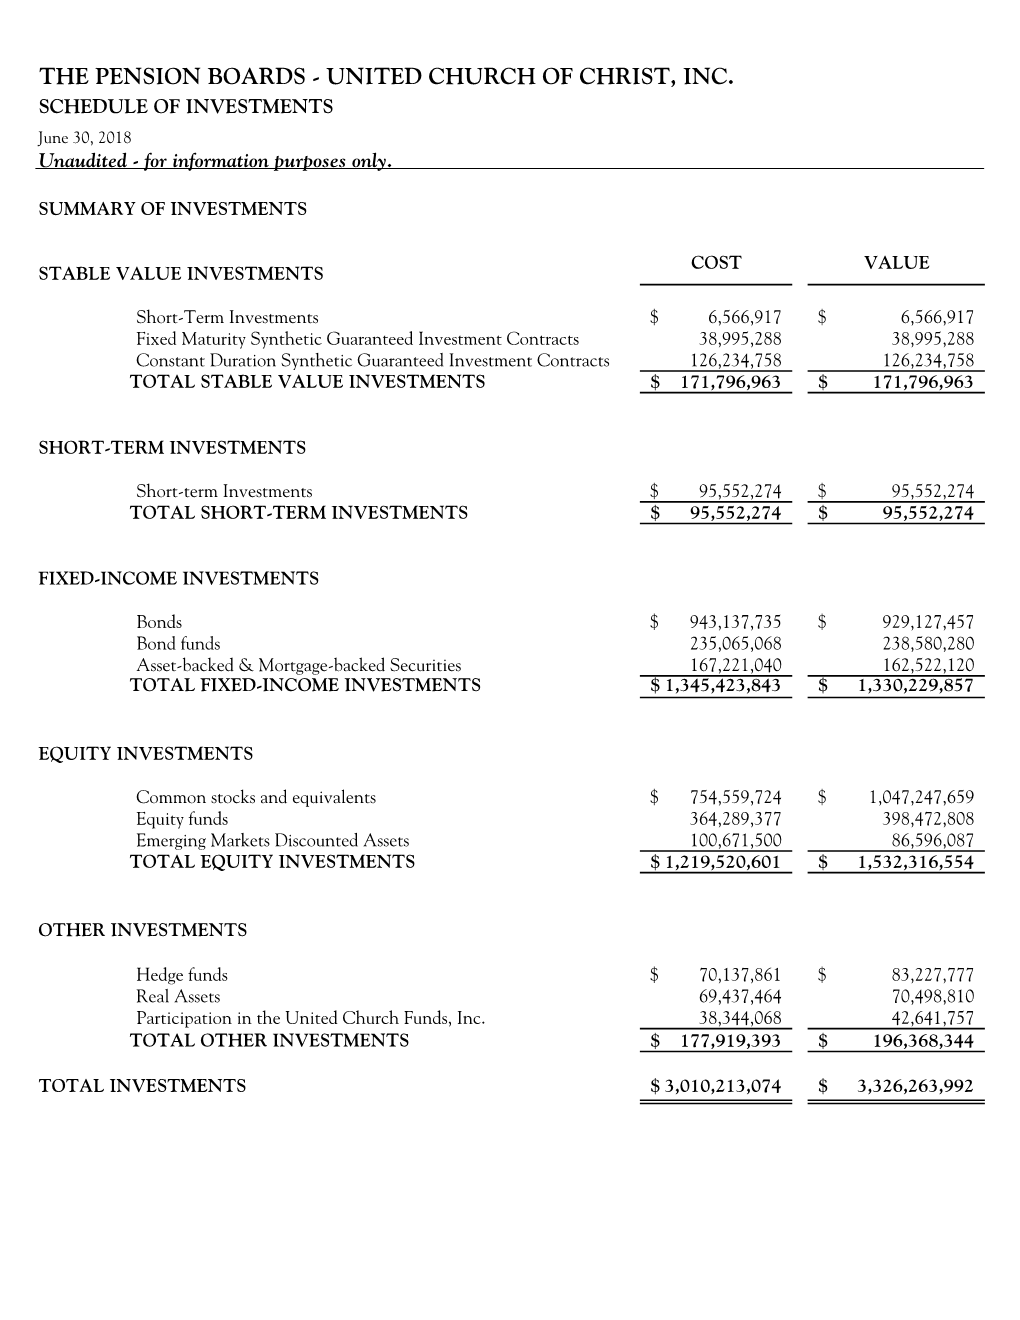 UNITED CHURCH of CHRIST, INC. SCHEDULE of INVESTMENTS June 30, 2018 Unaudited - for Information Purposes Only